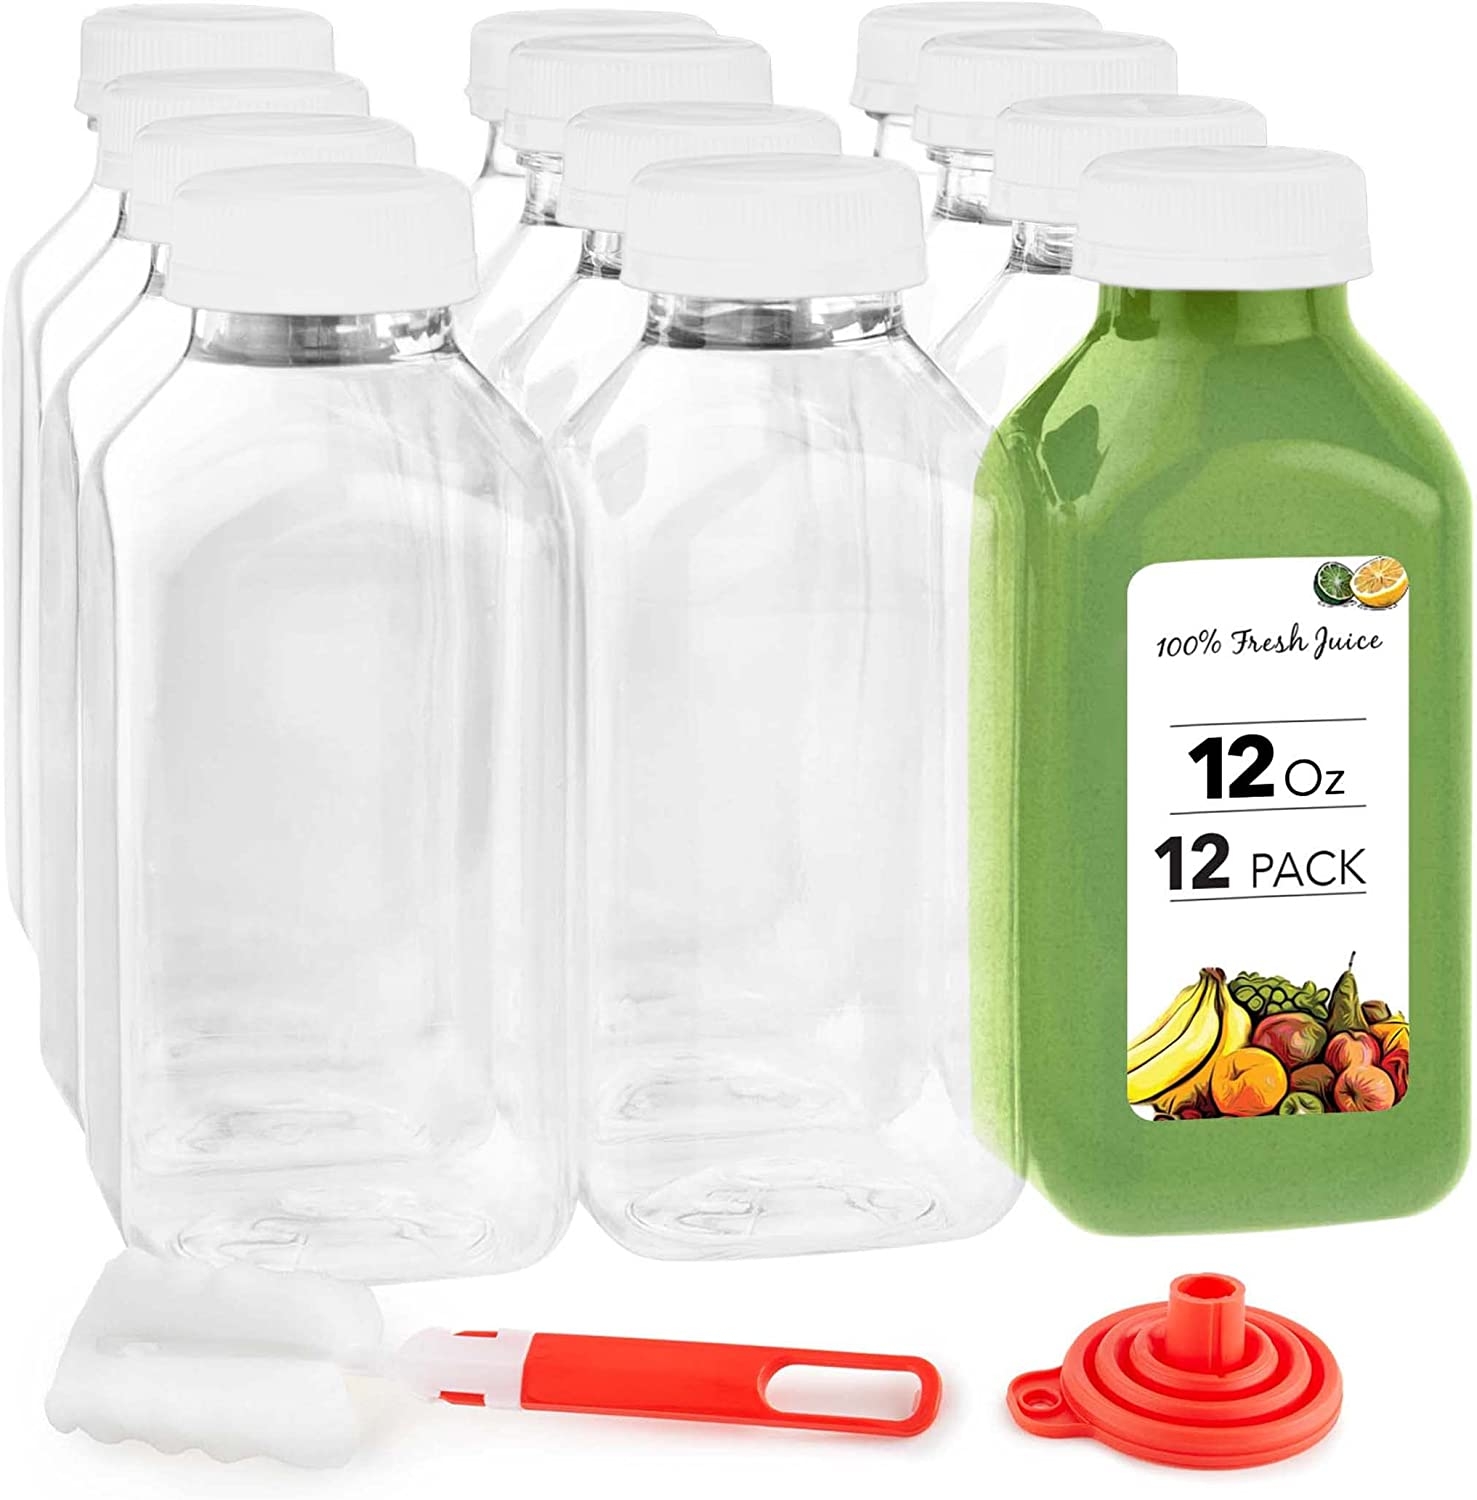 Juice Bottles with Caps for Juicing & Smoothies, Reusable Clear Empty Plastic Bottles with Caps, 16 Ounce Drink Containers for